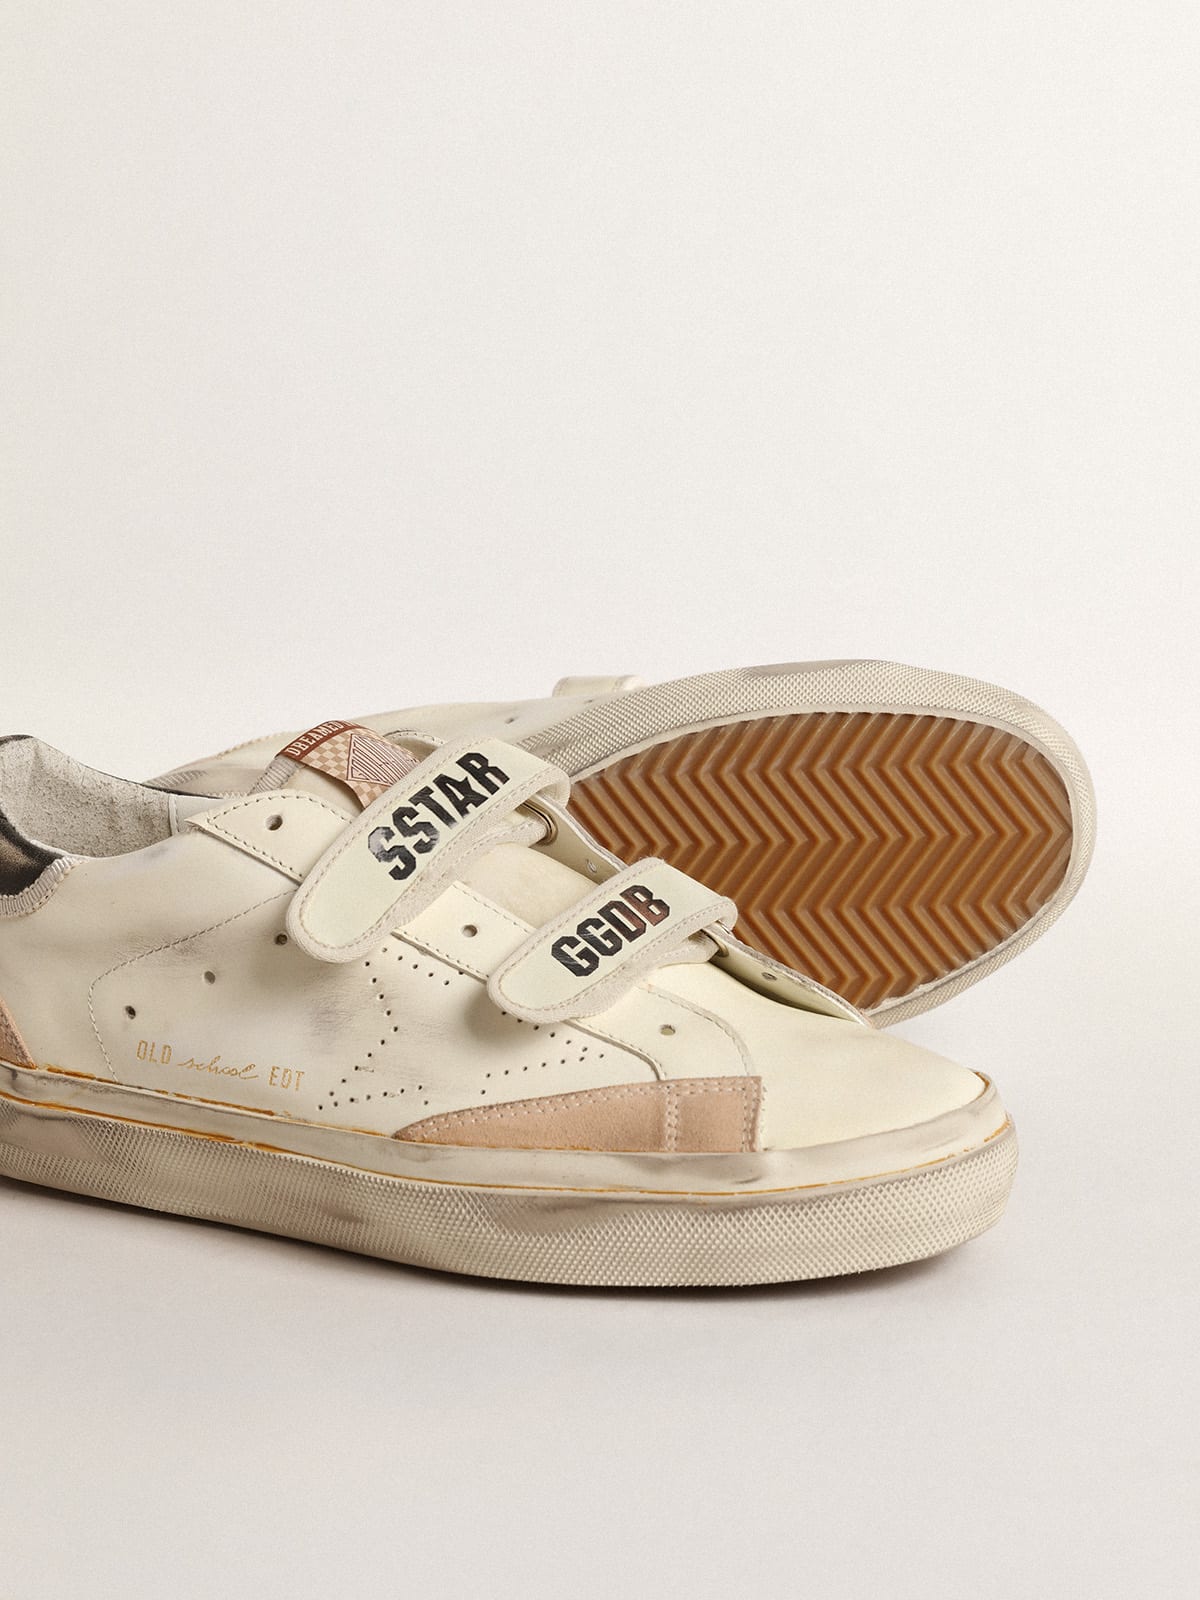 Golden Goose - Old School LTD with perforated star and black leather heel tab in 